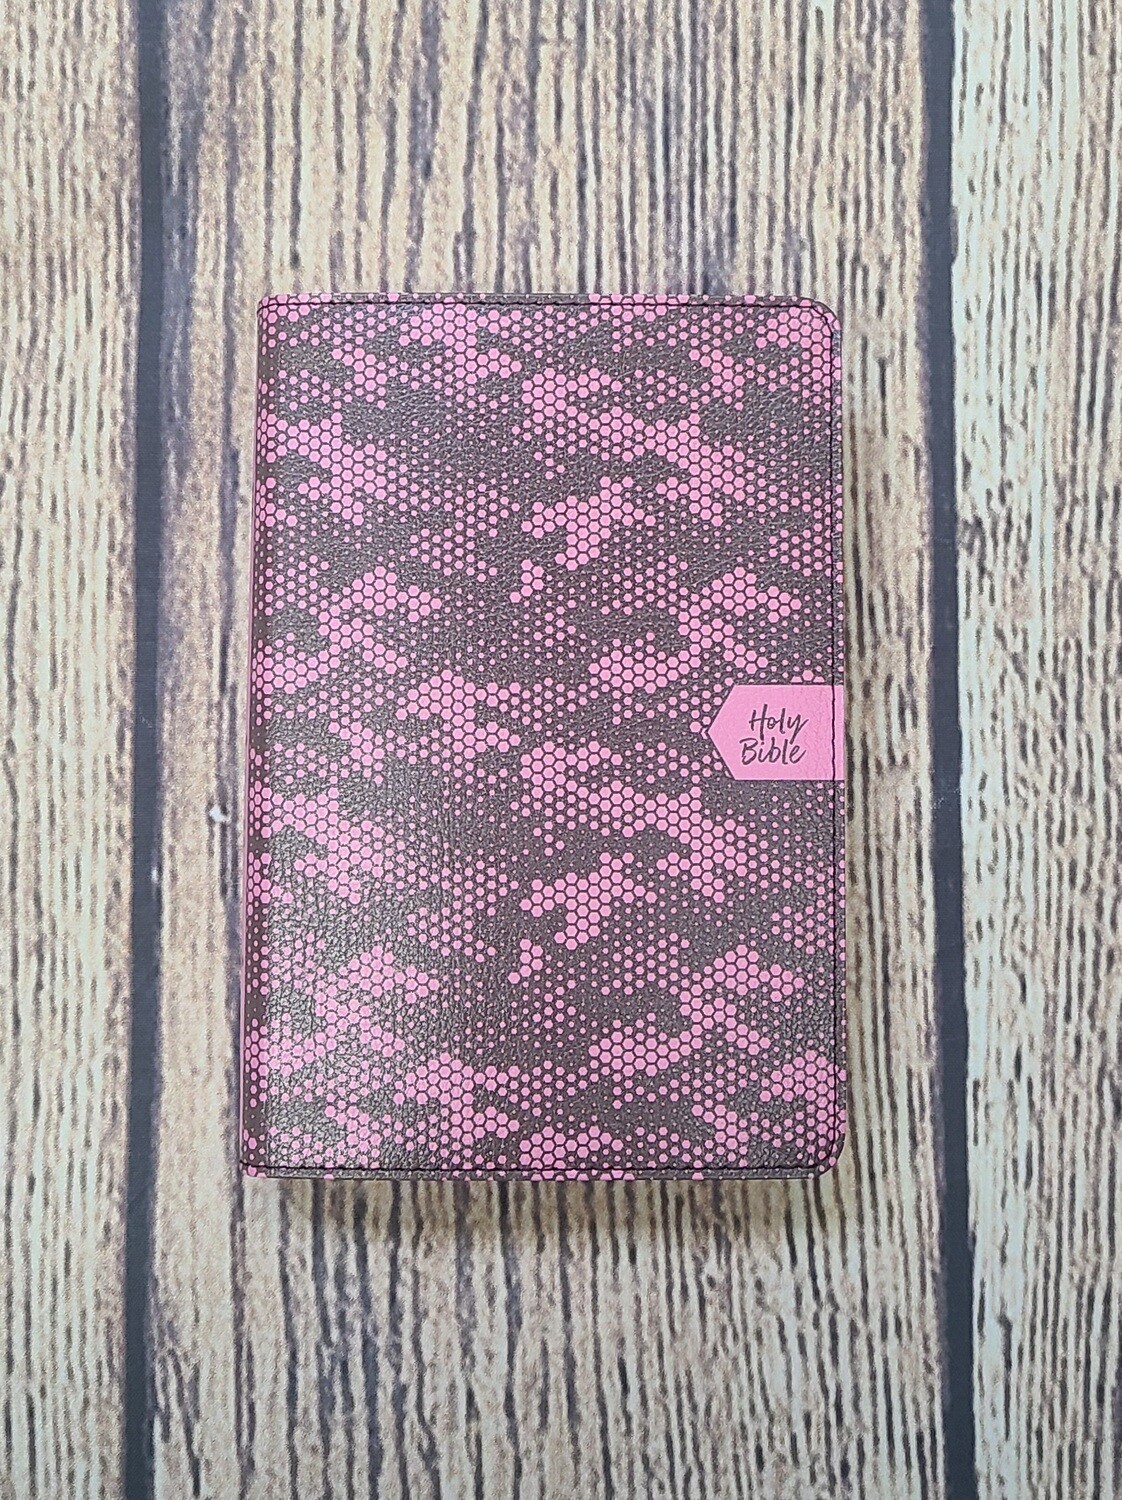 CSB On-The-Go Pink Camouflage Leather Bible